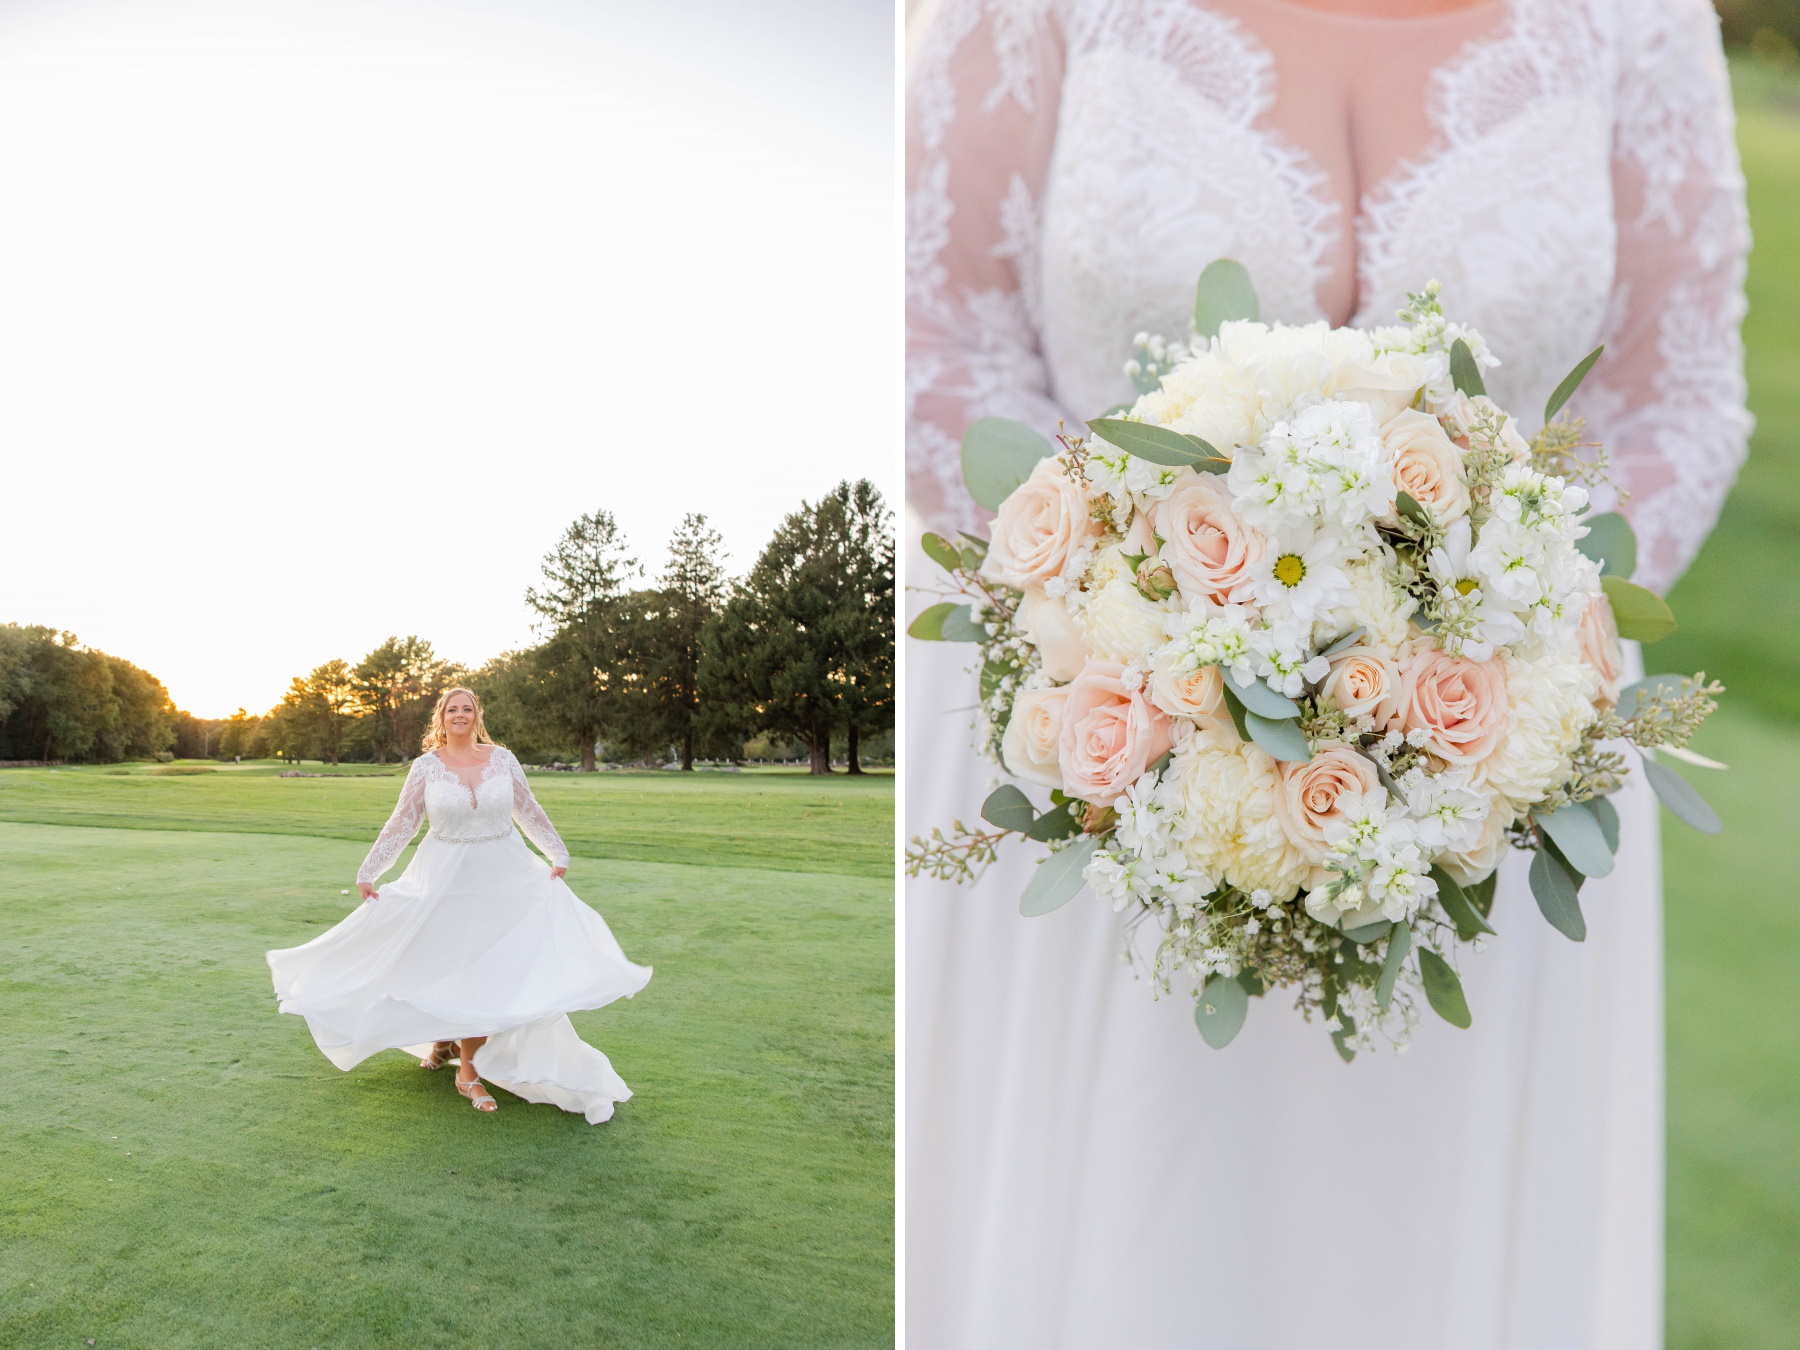 Left photo is bride spinning in dress on a field. Right photo is a close up of the bride's bouquet at Great Neck Country Club Wedding